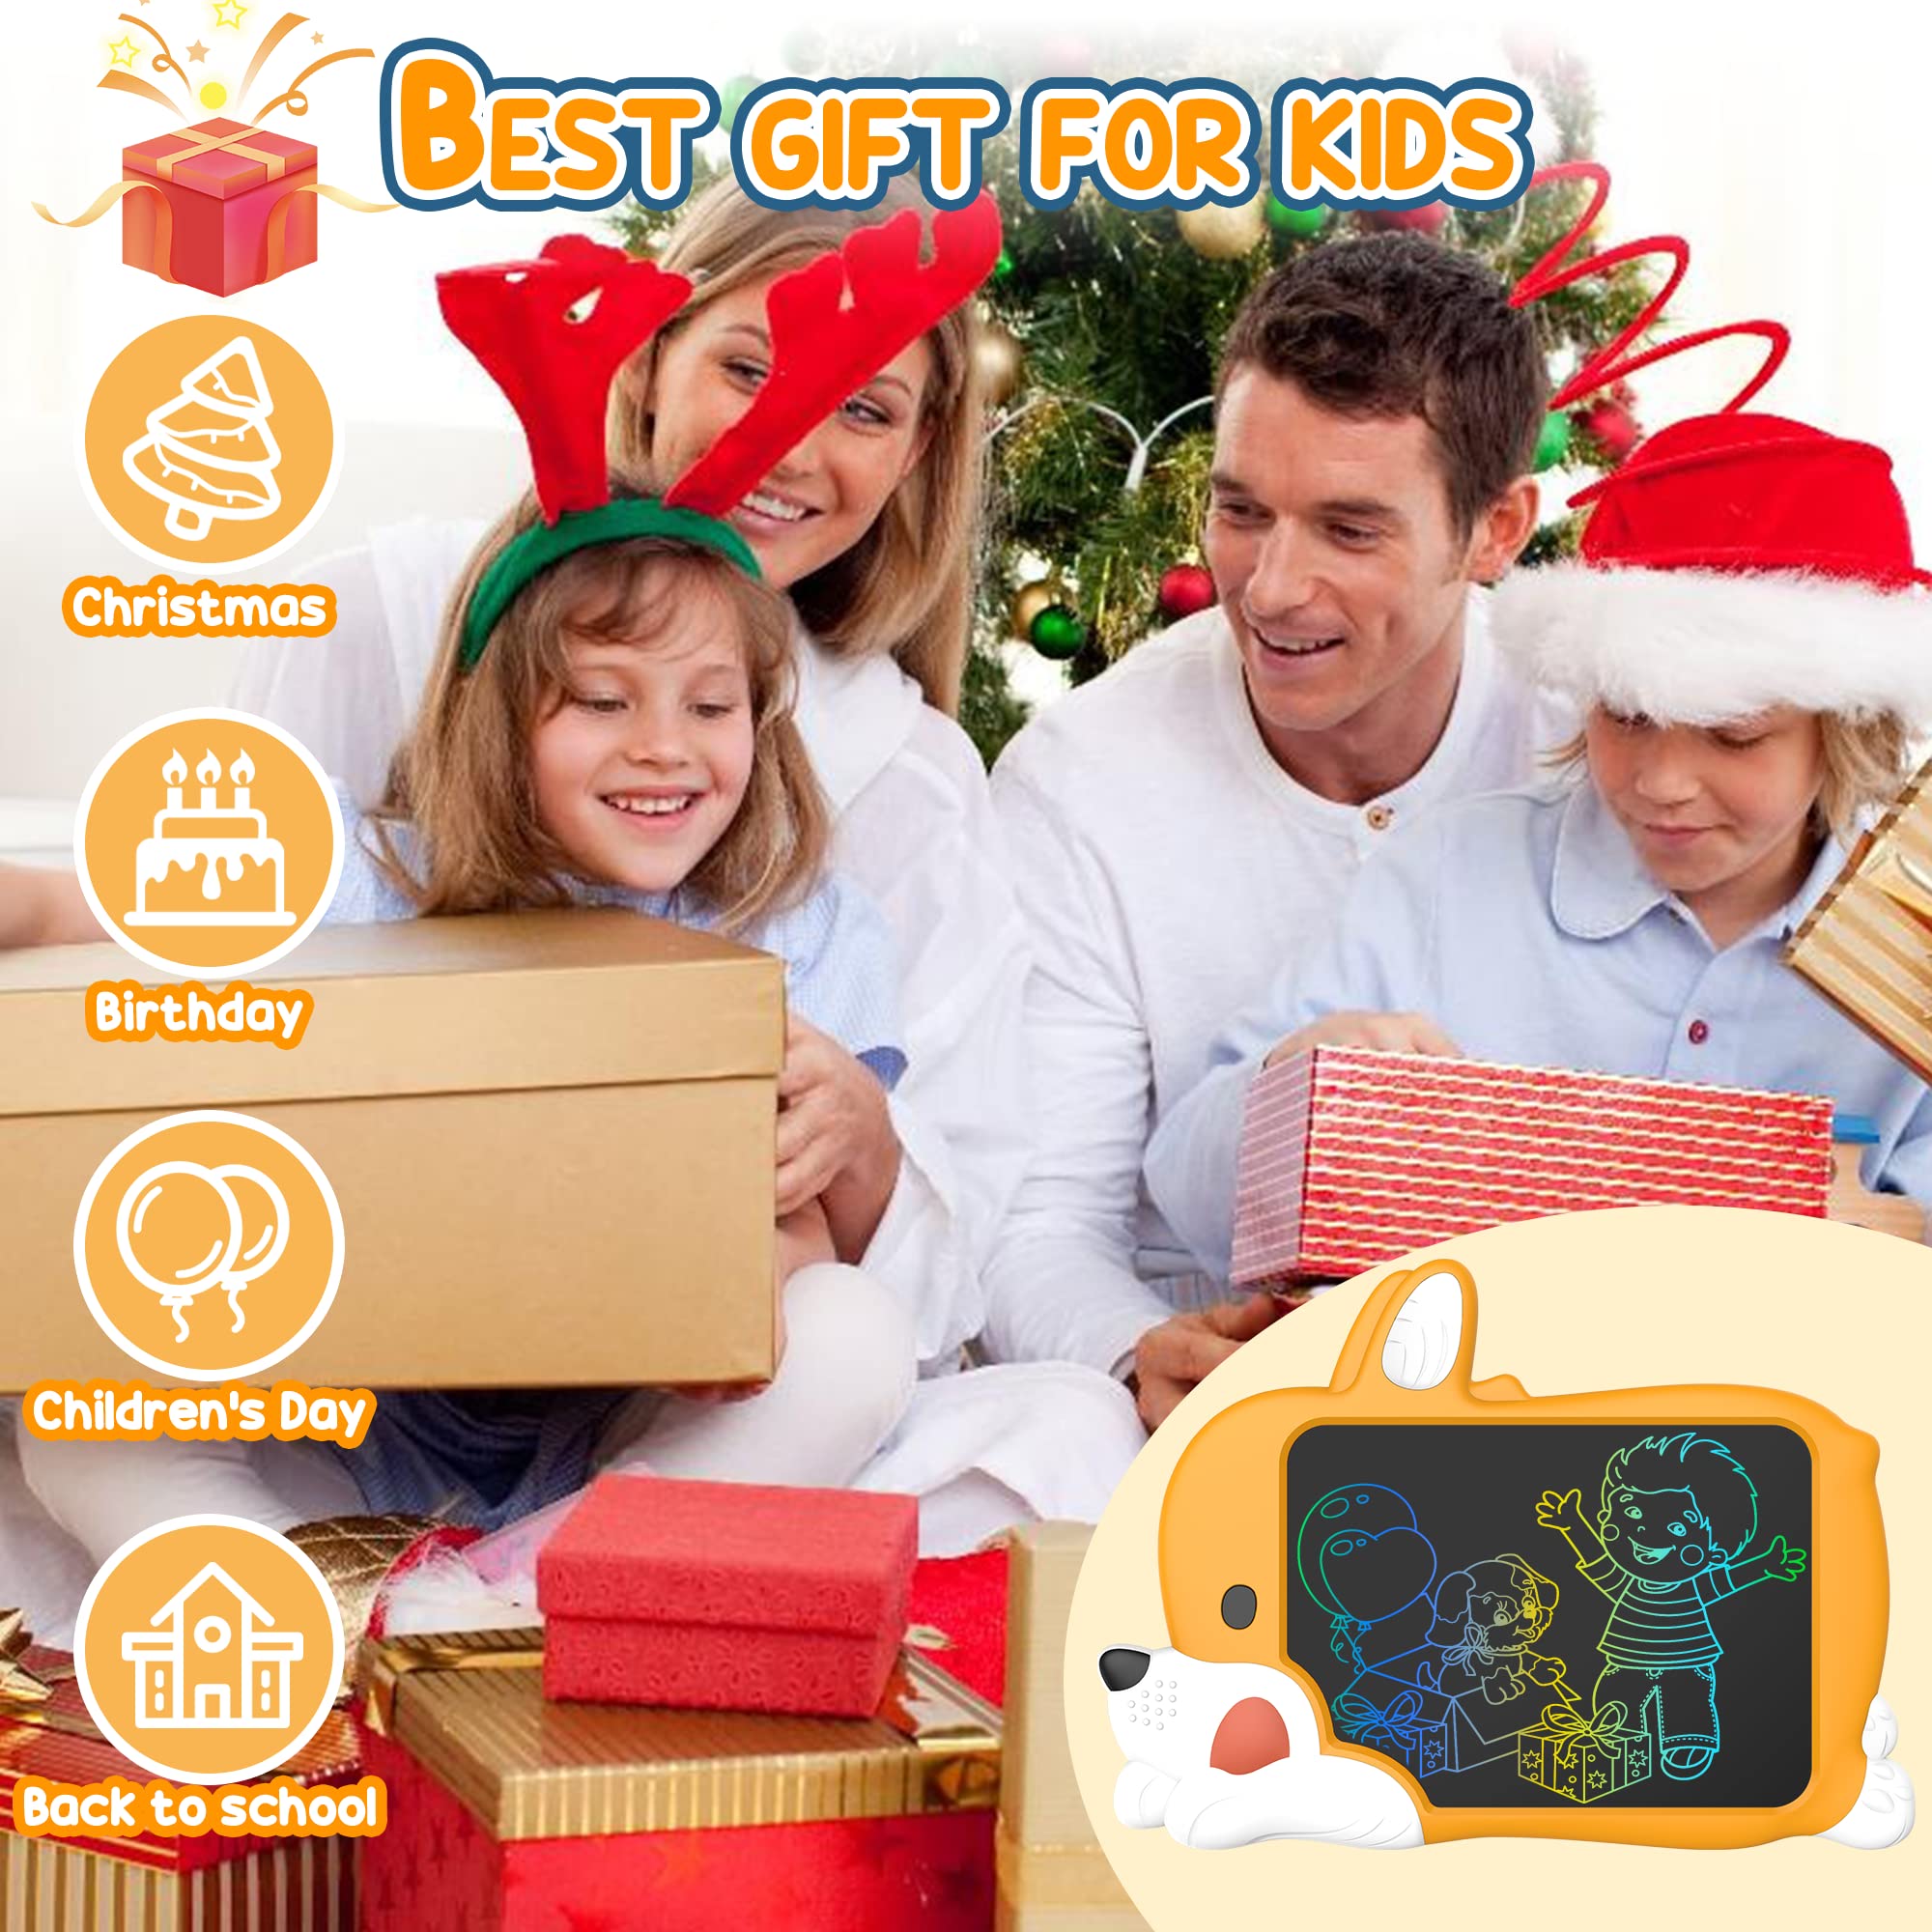 LCD Writing Tablet for Kids Colorful Screen Doodle Board - 11 Inch Electronic Erasable Kids Drawing Tablet Educational Learning Toys Kids Christmas Birthday Gifts for 3 4 5 6 7 8 Year Old Girls Boys